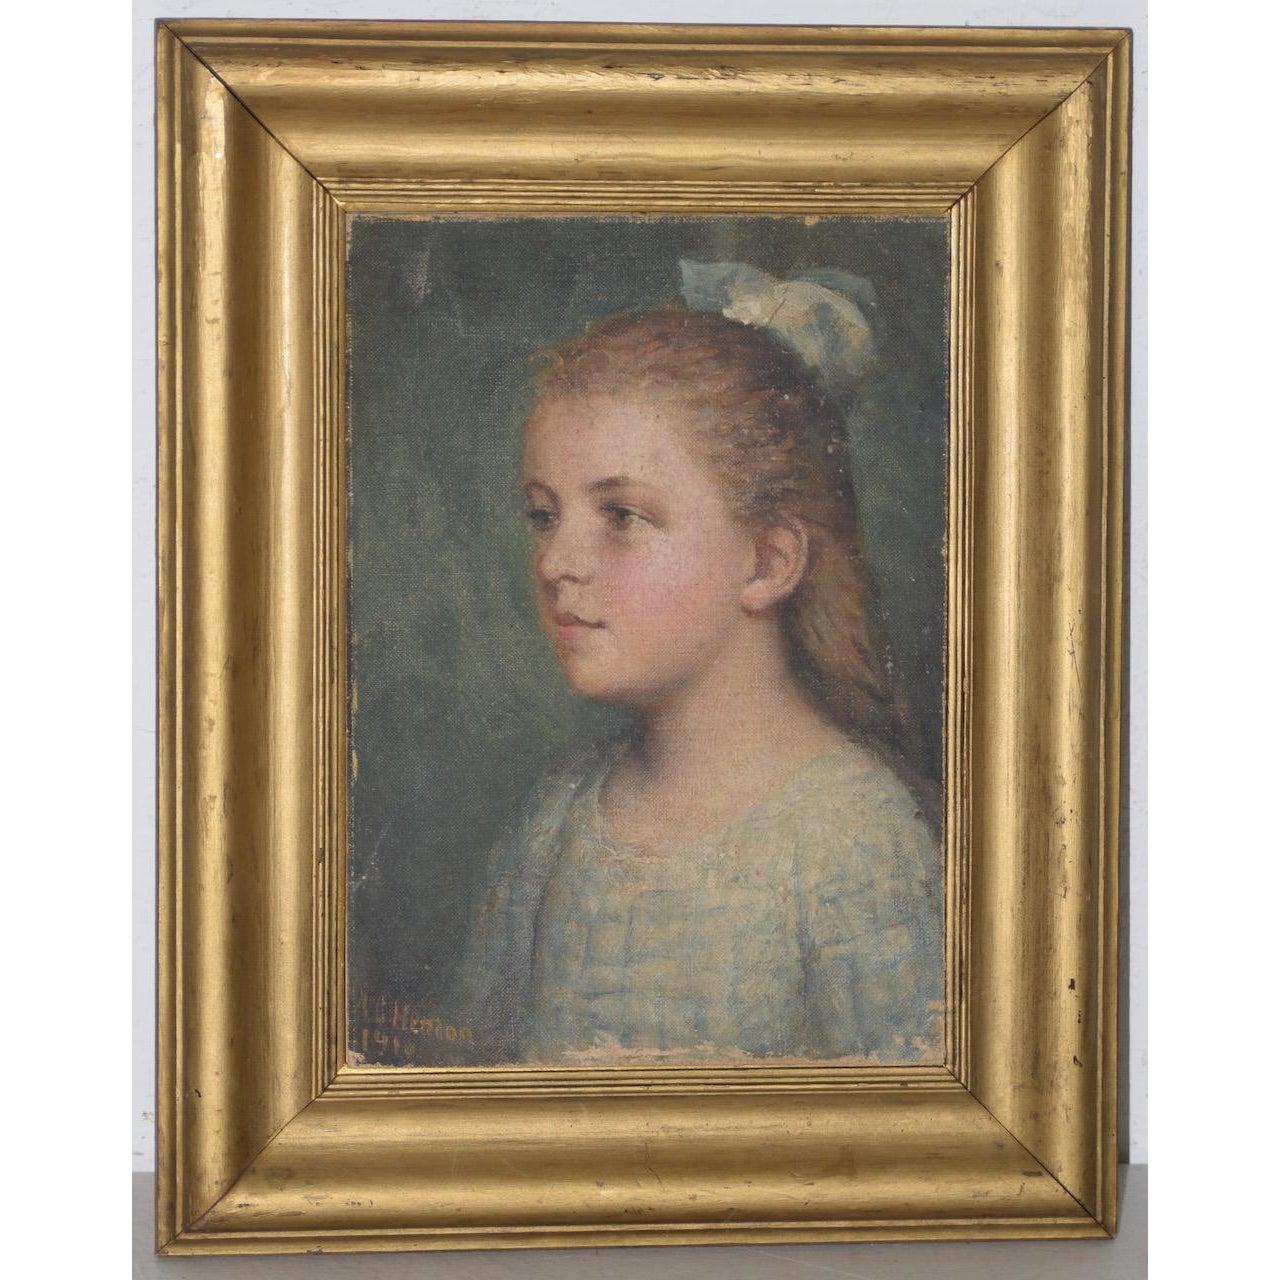 Portrait of a Young Child by Henton c.1910